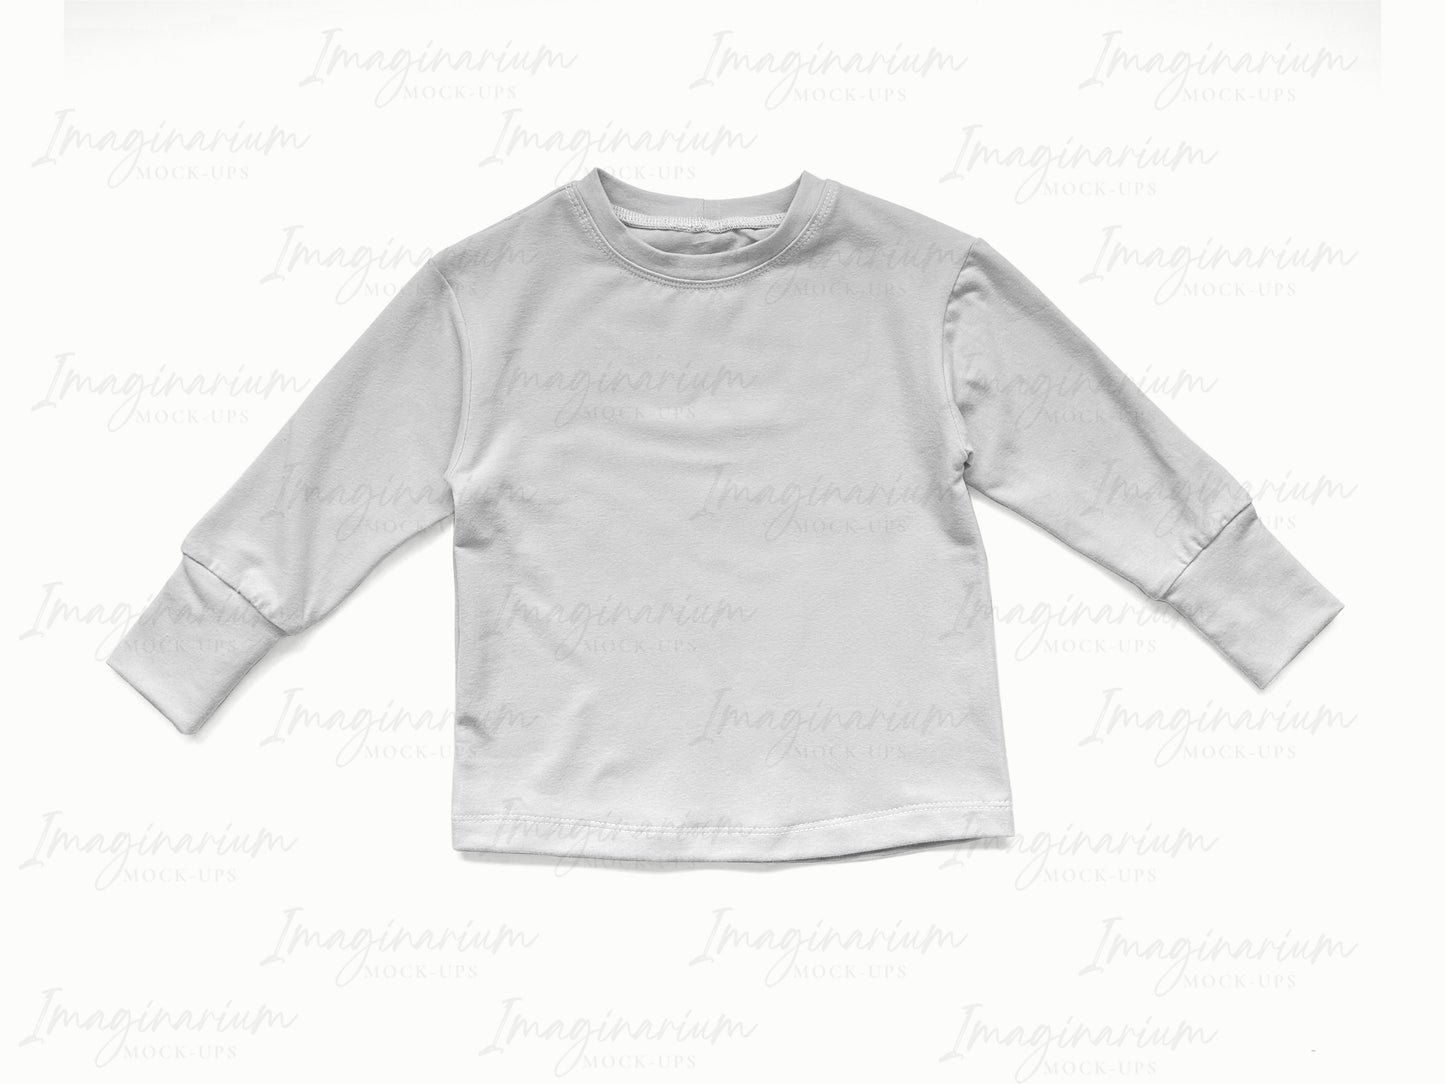 Gus + Steel Long Sleeve Drop Shoulder Tee Shirt Mockup, Realistic Clothing Mock Up for Photoshop and Procreate